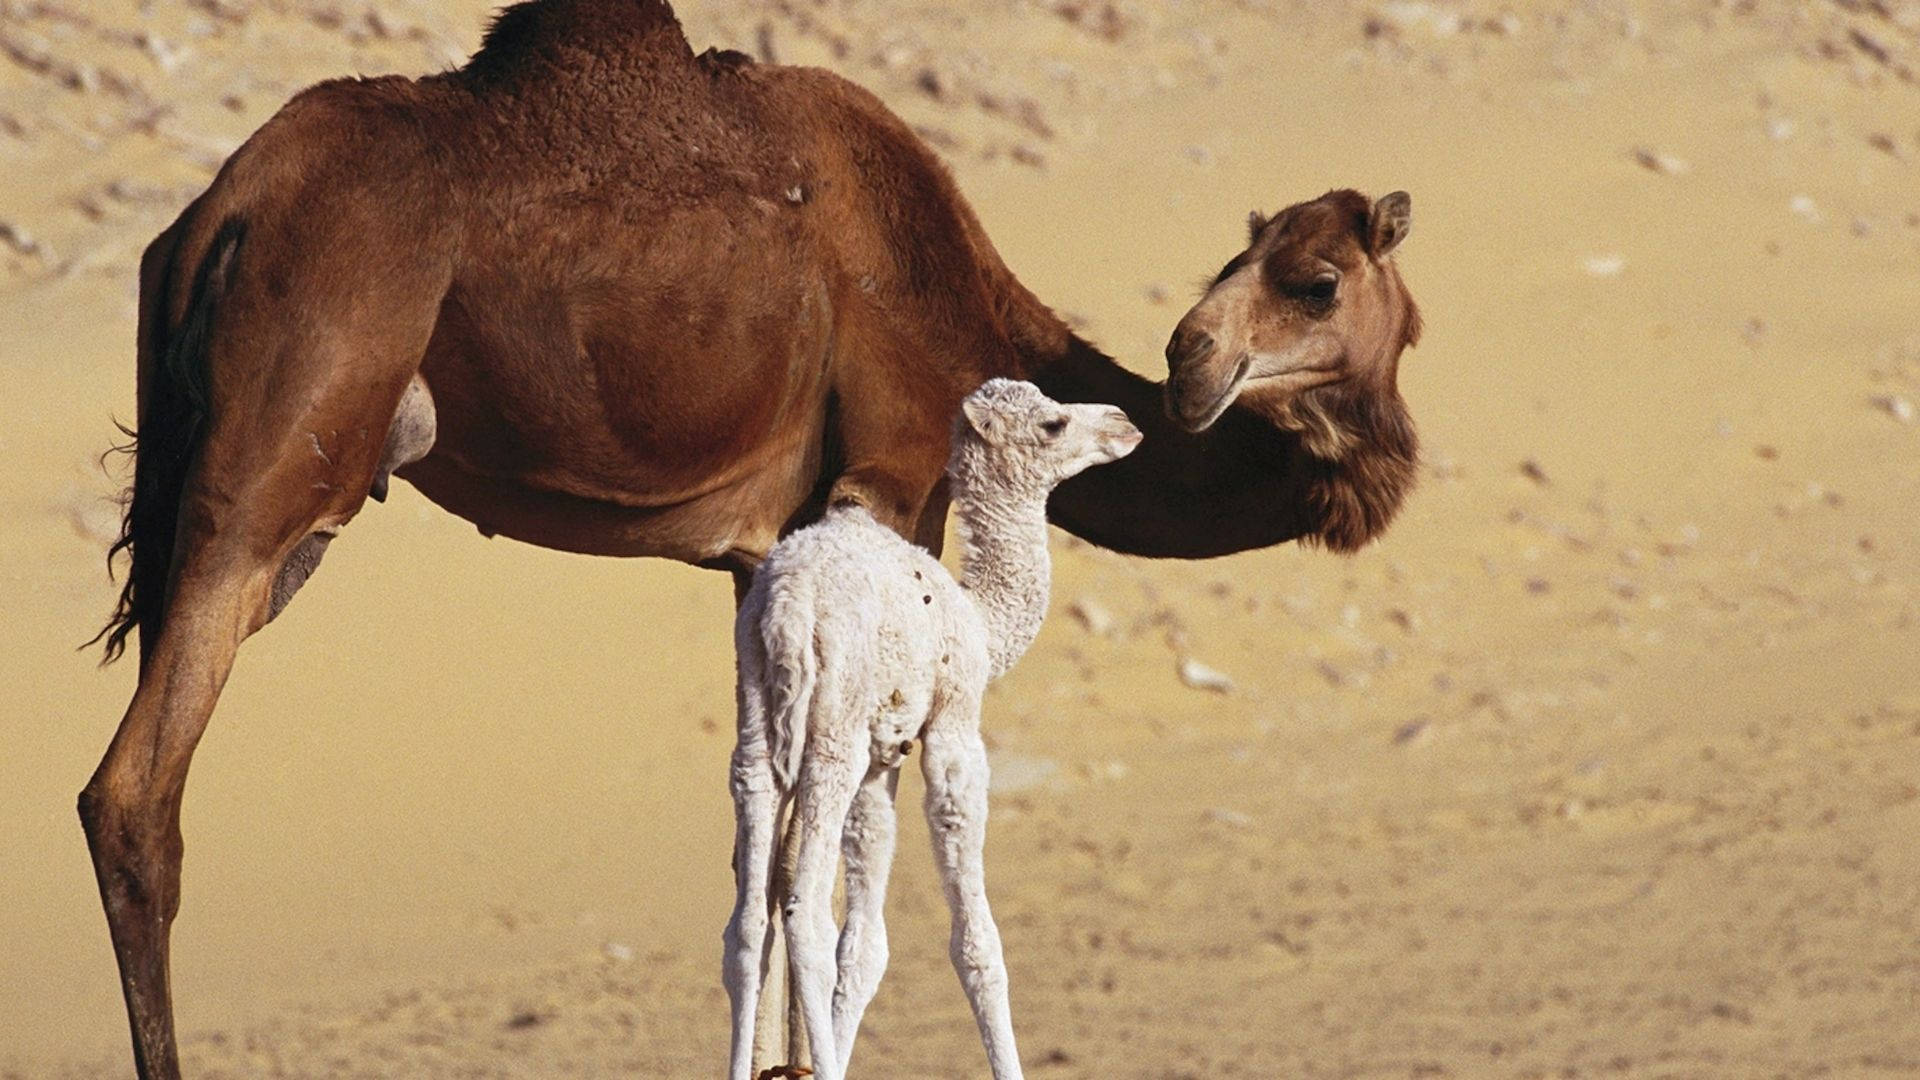 A Cherished Moment Between A Mother Camel And Her Baby